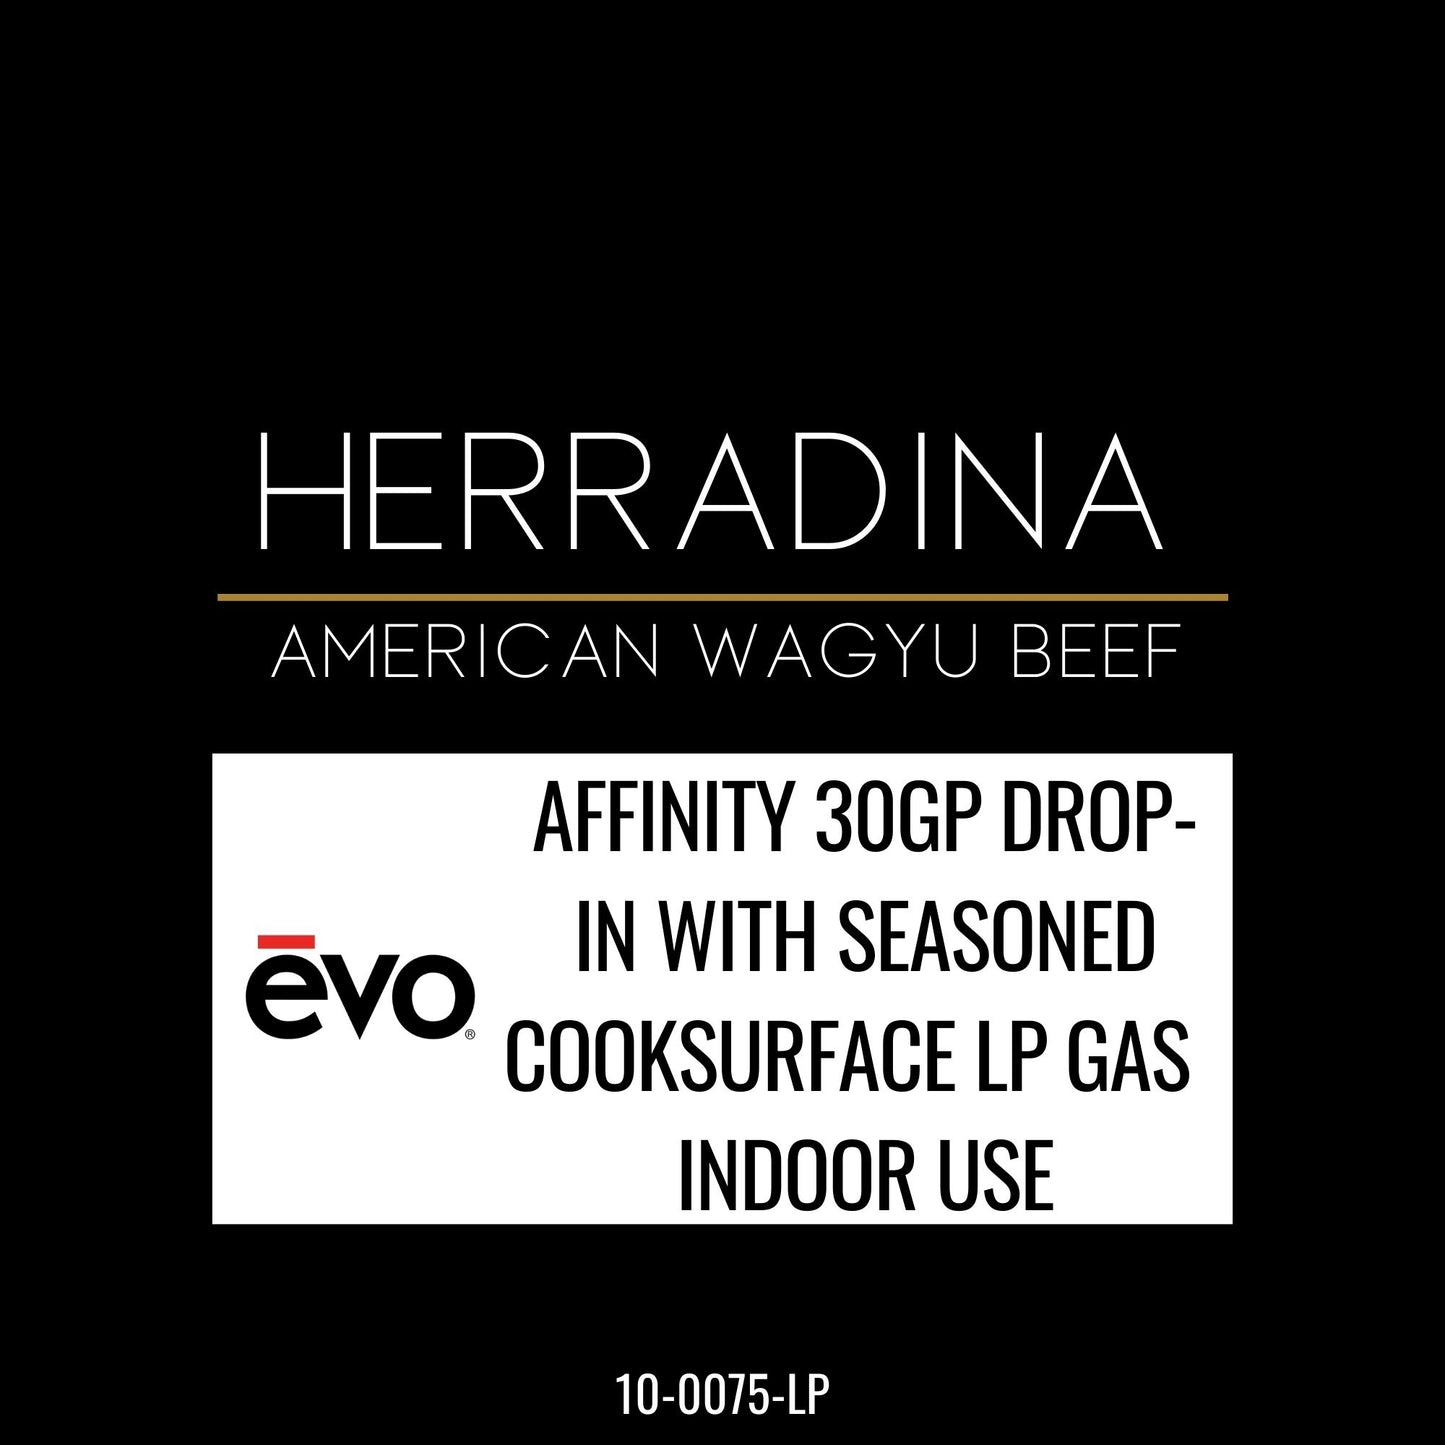 EVO AFFINITY 30GP DROP-IN WITH SEASONED COOKSURFACE LP GAS - FULLY ASSEMBLED FOR INDOOR USE